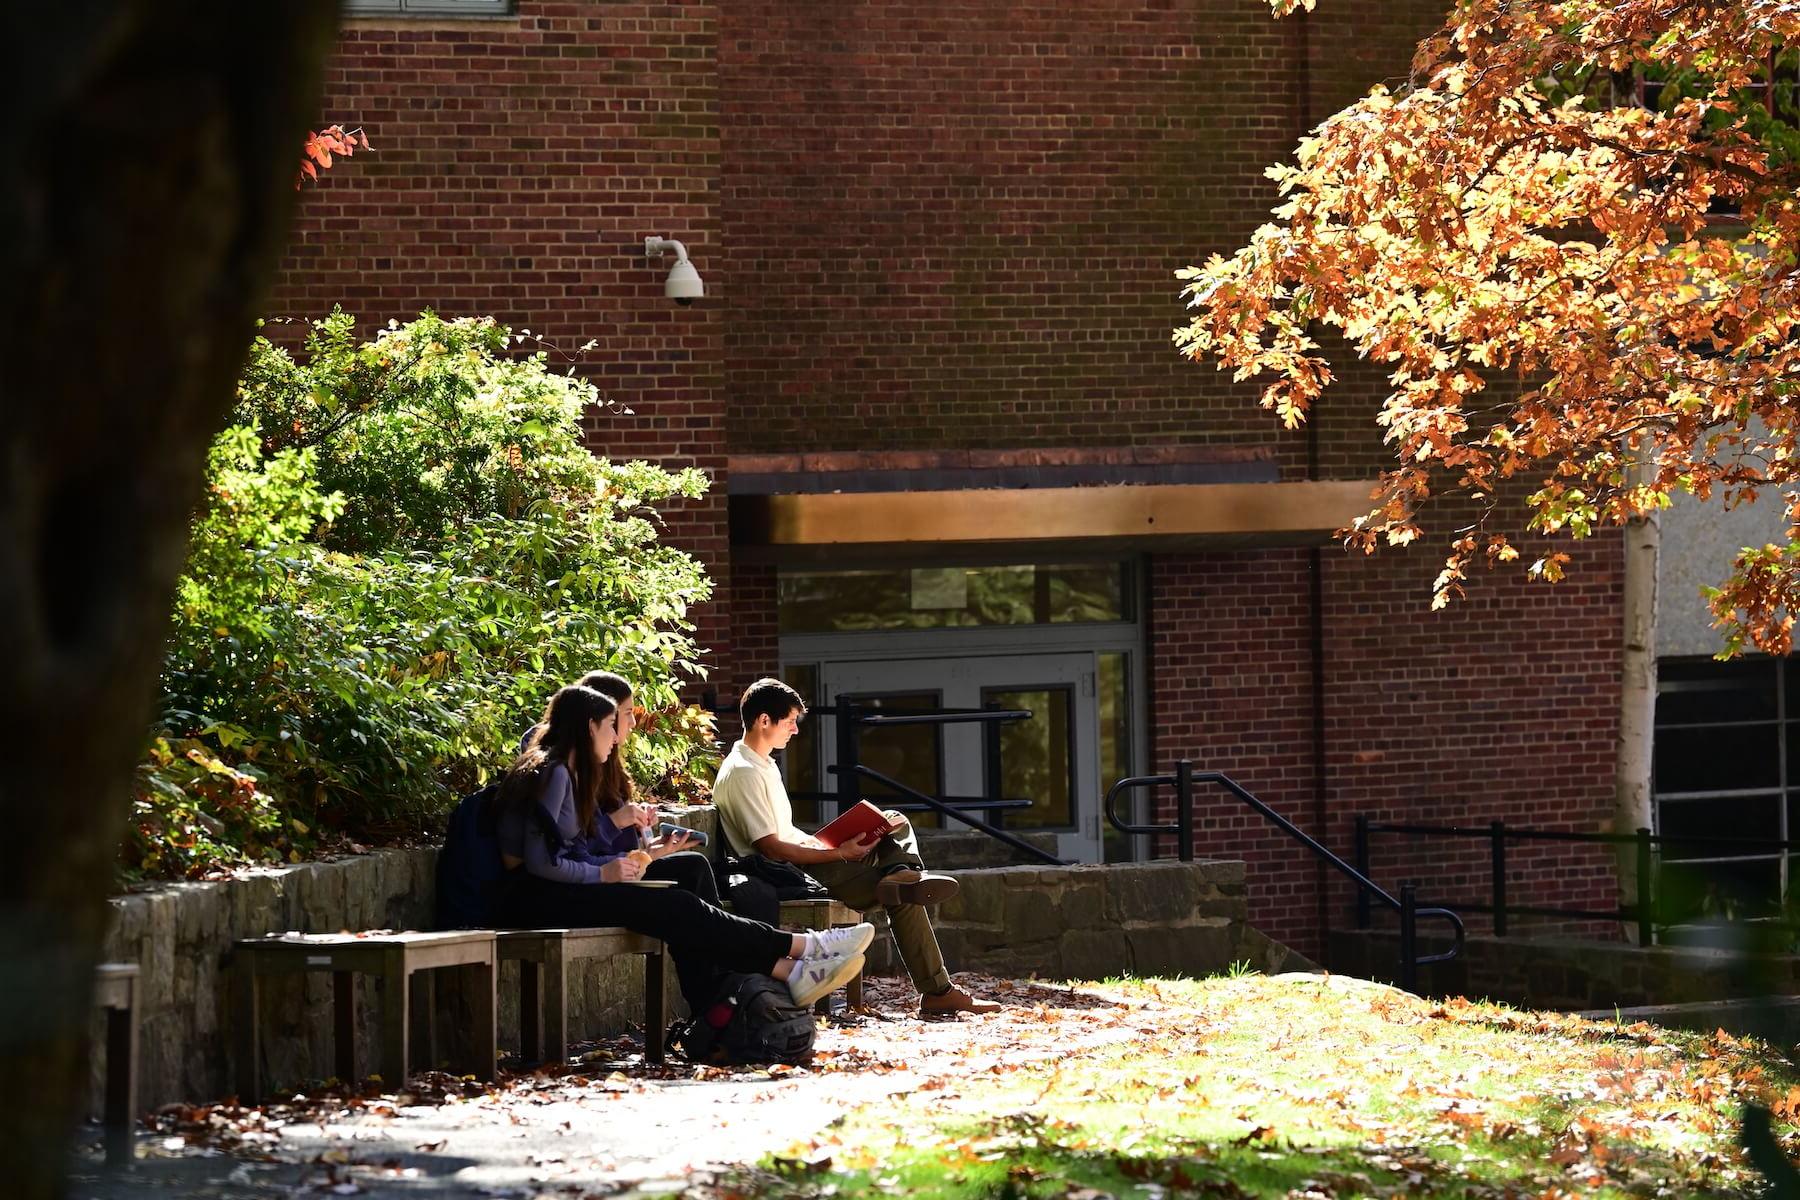 Ethical Culture Fieldston School Upper School students sit in the quad in the sun